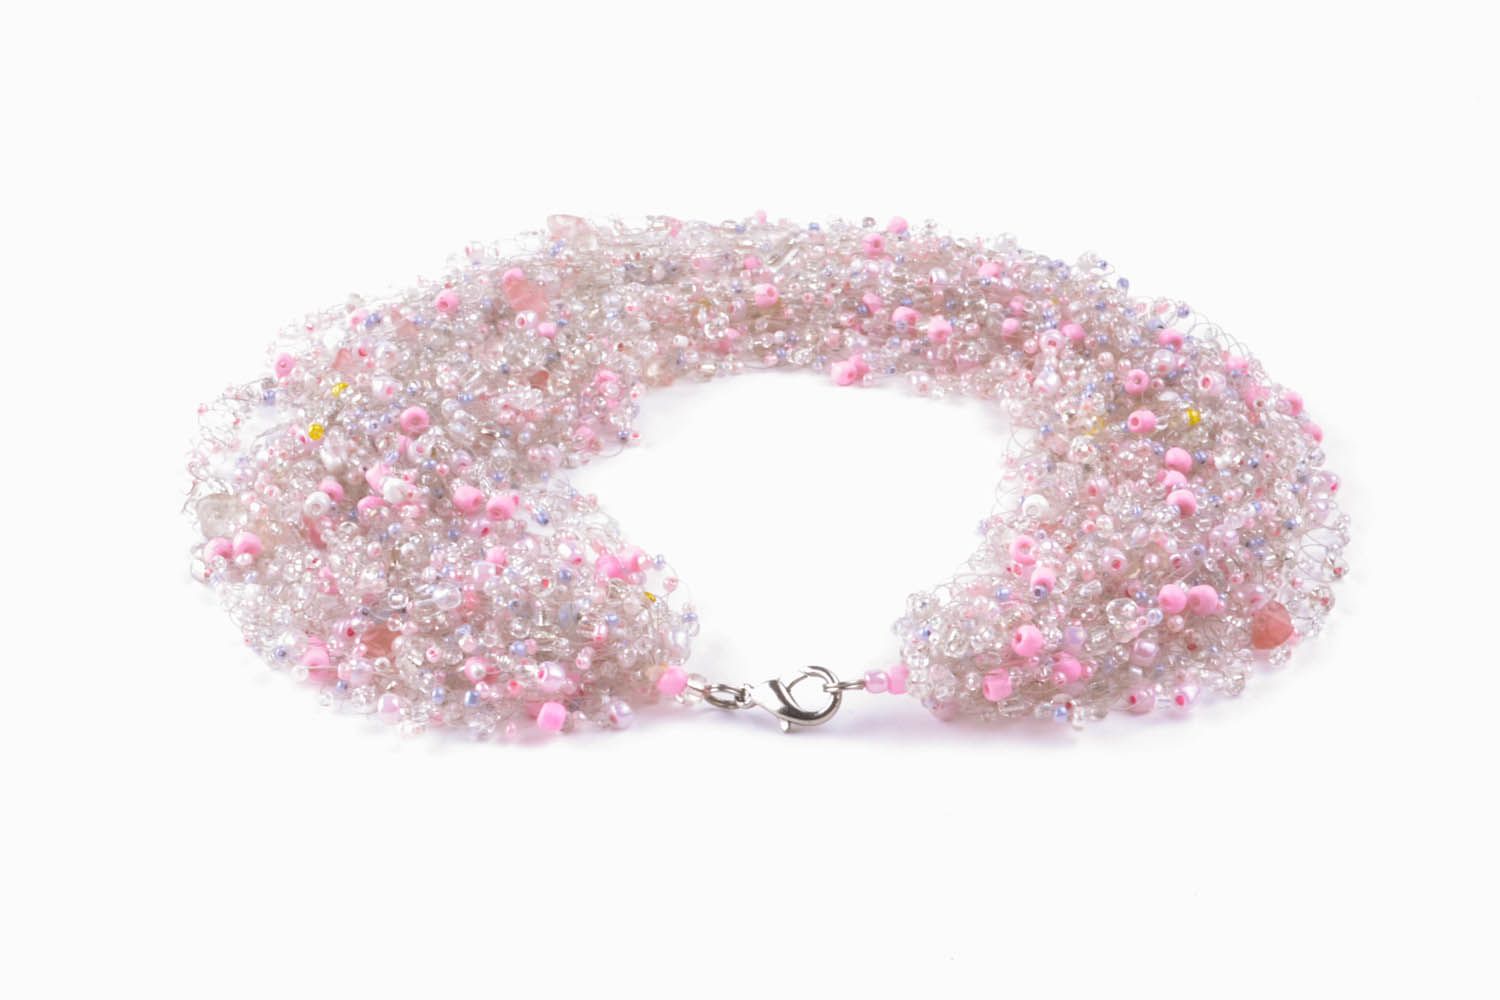 Soft beaded necklace made of natural stones photo 4